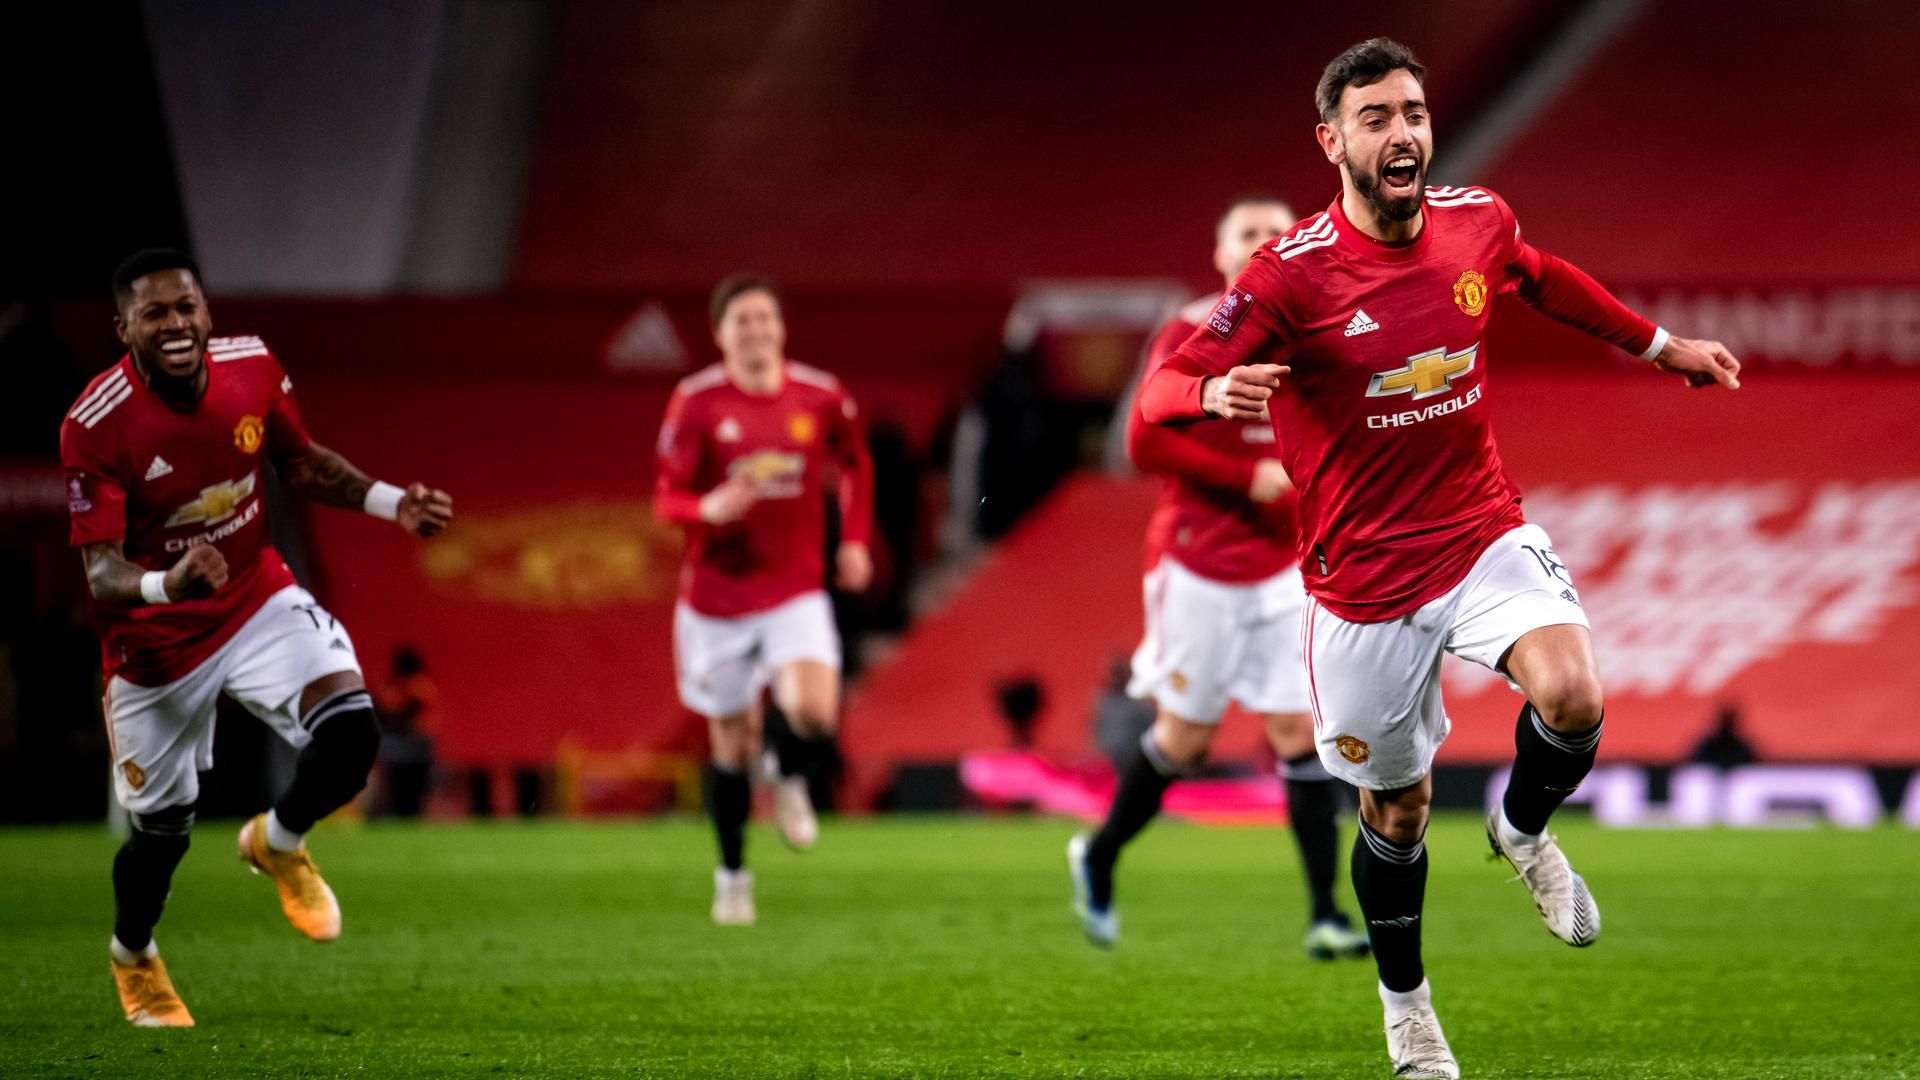 Match report Utd 3 Liverpool 2 Cup fourth round 24 January 2021